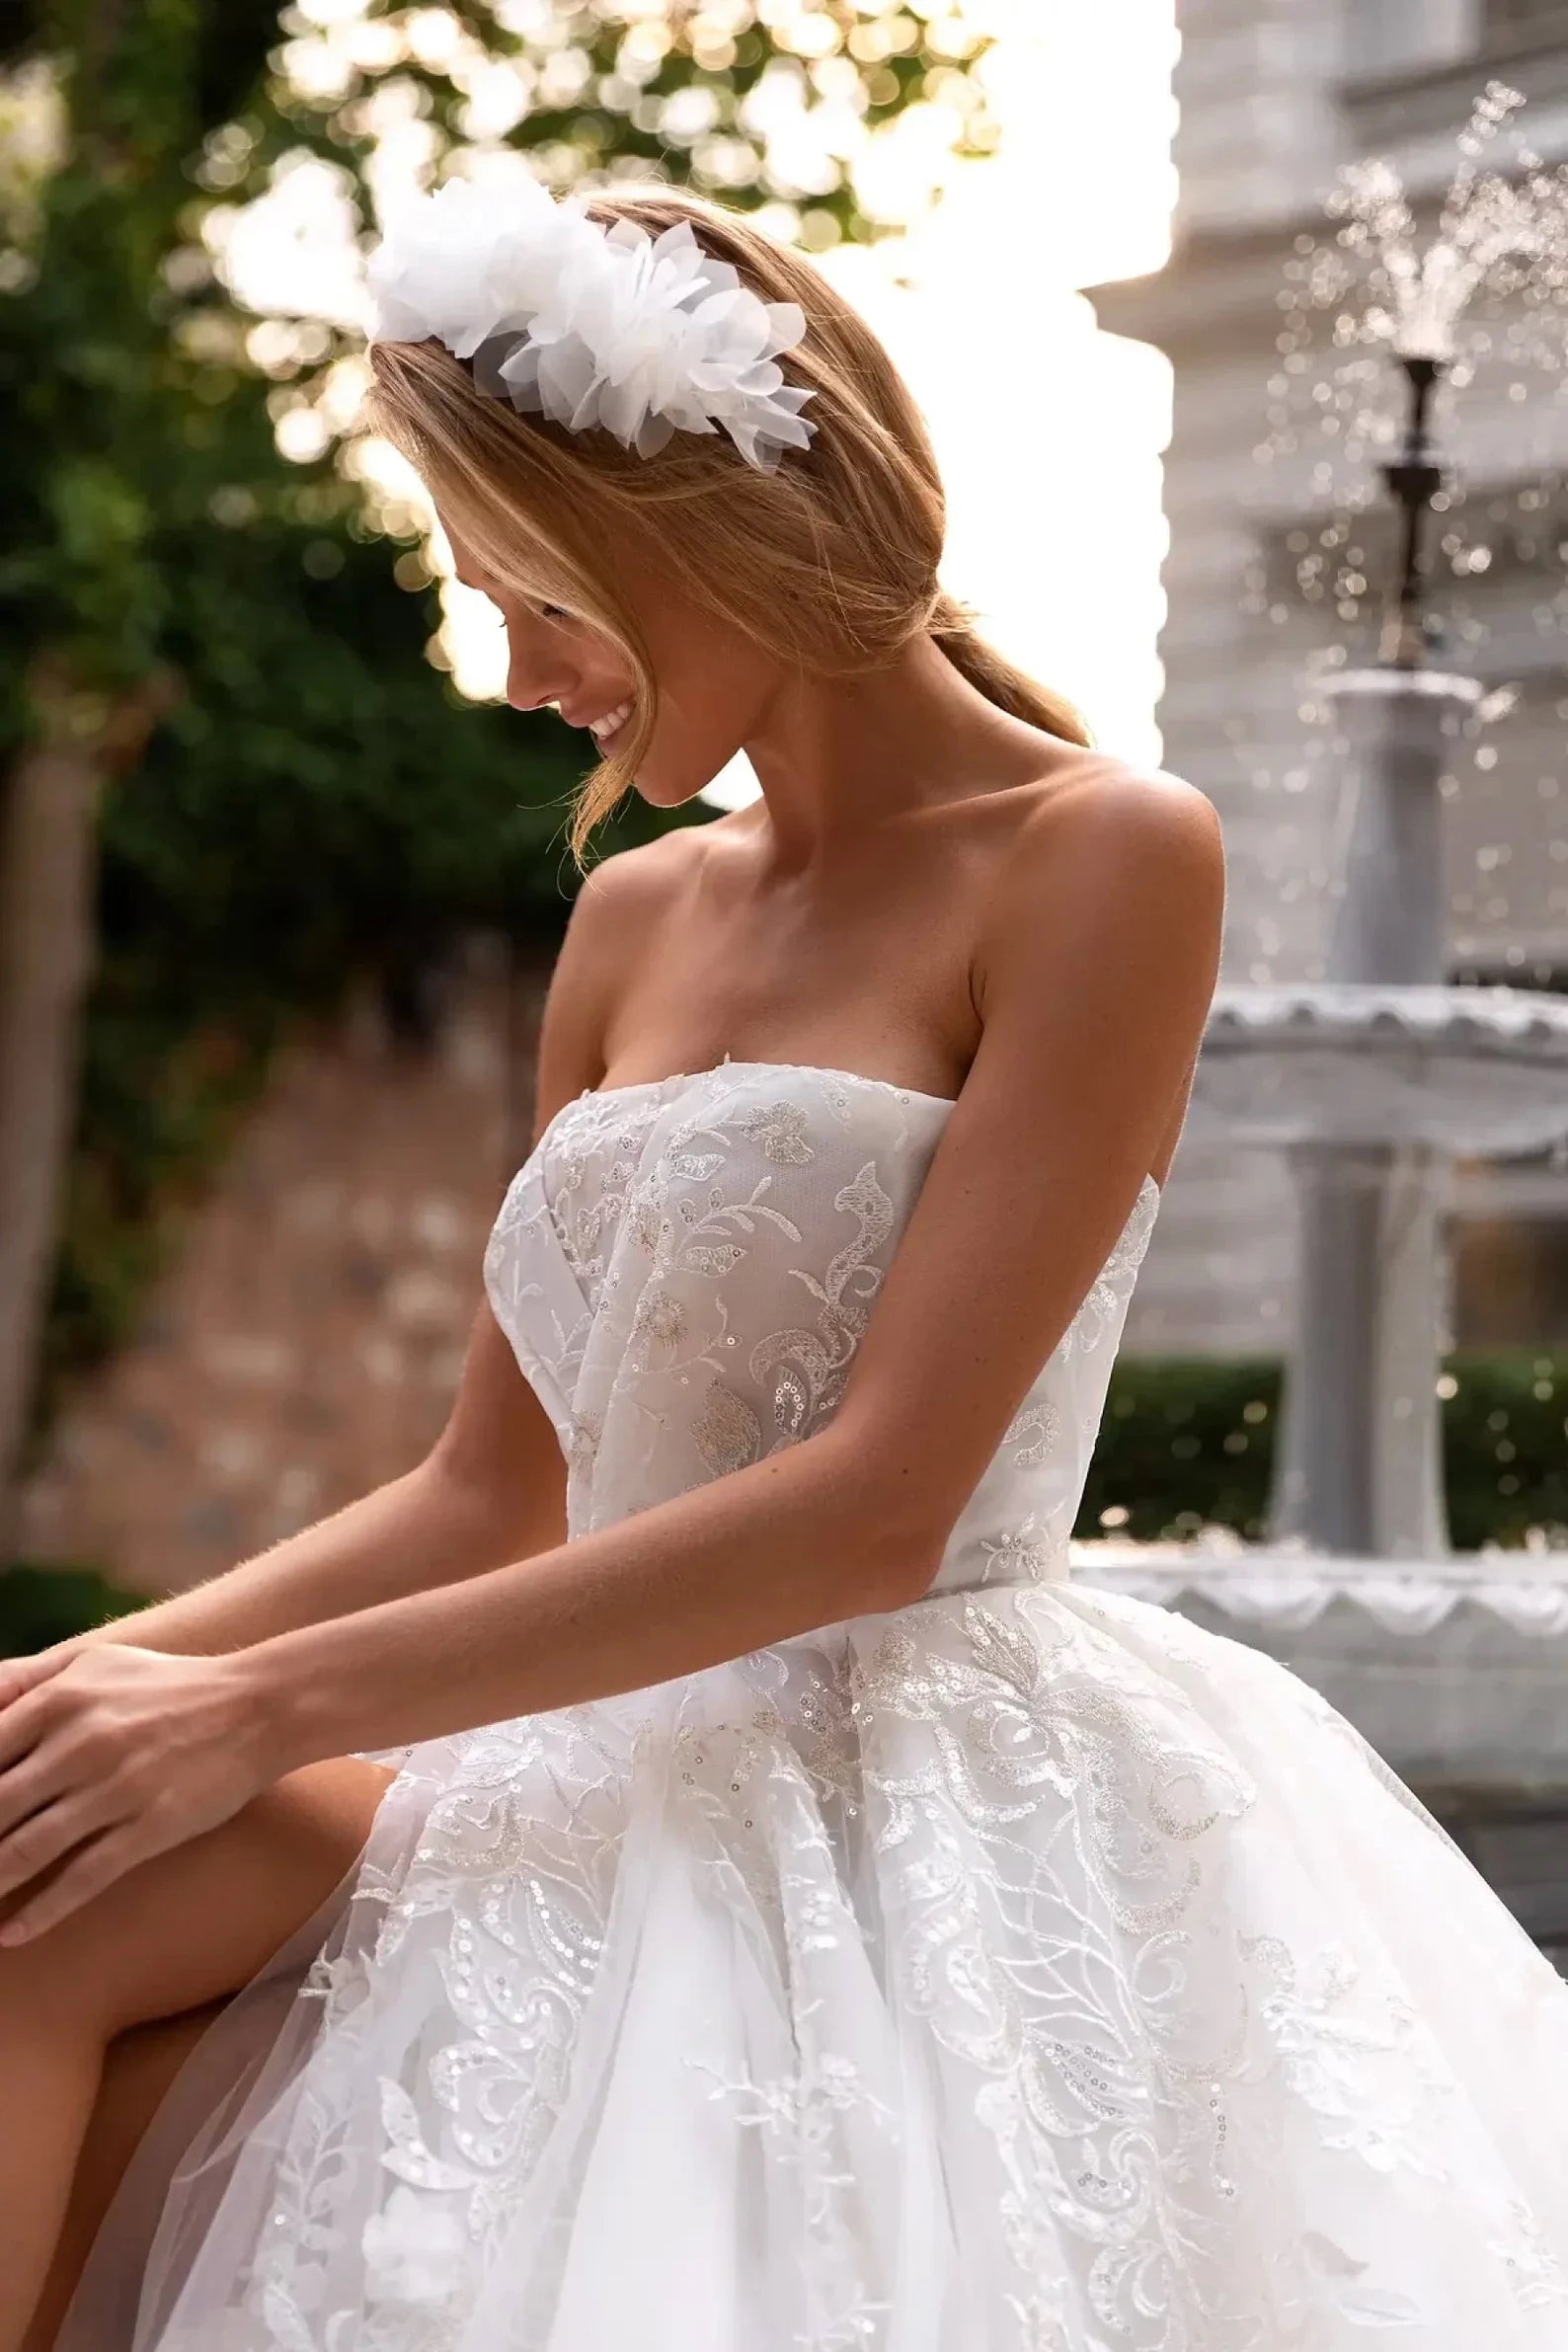 A-line Elegant Wedding Gowns, Strapless Lace Bridal Gowns, Newest Wedding Dresses